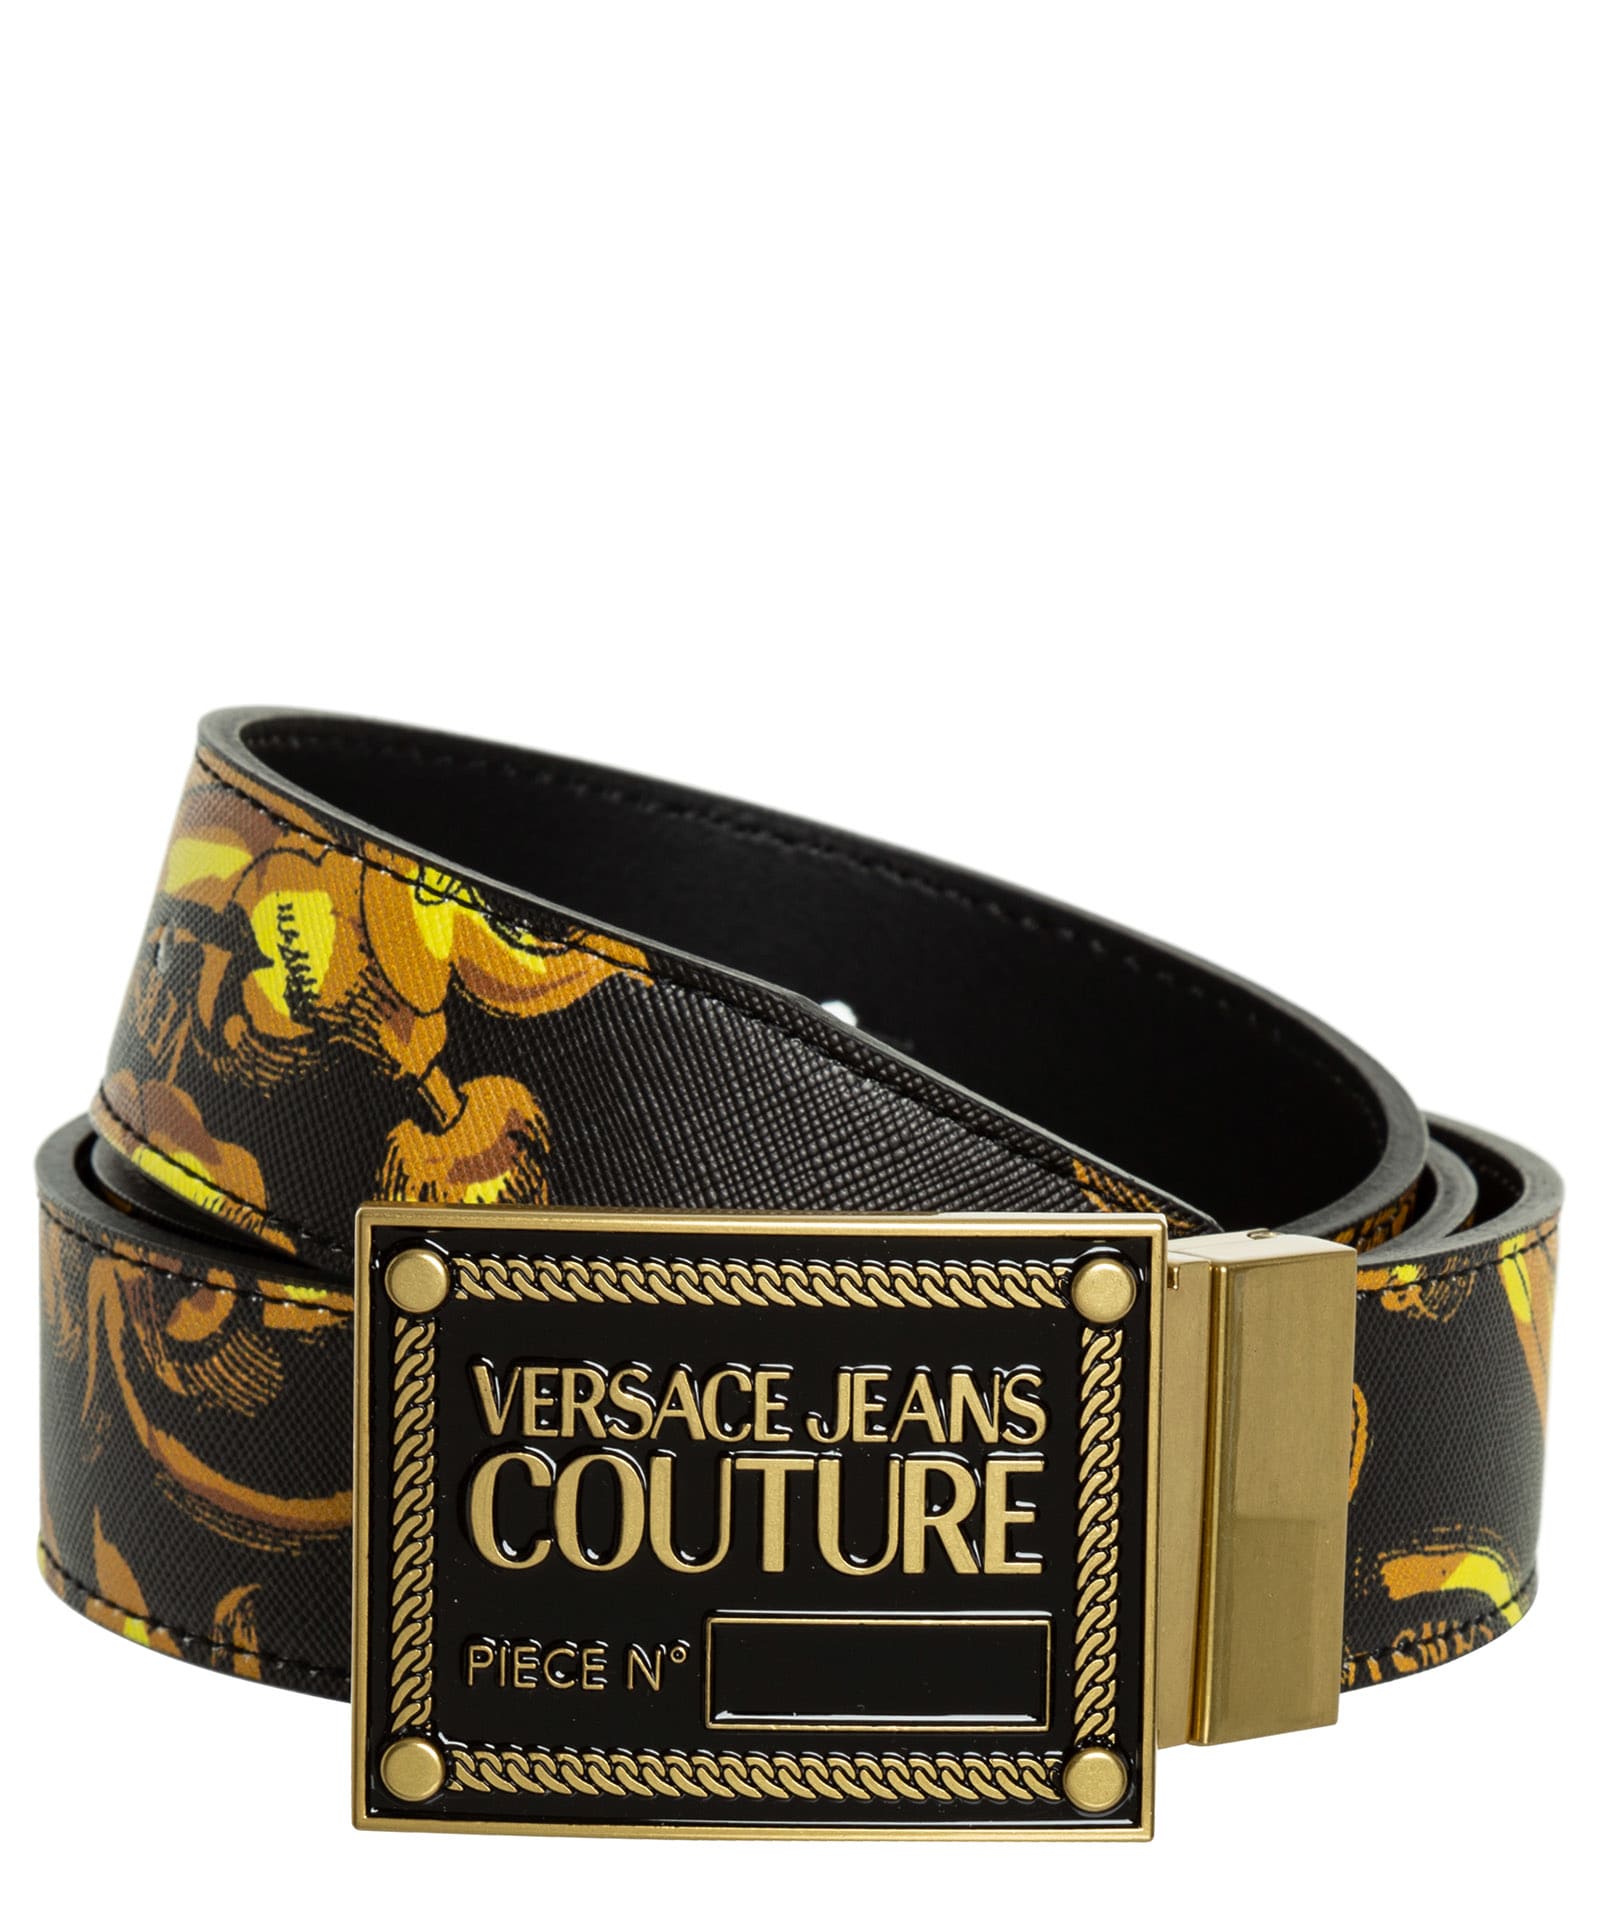 Versace Jeans Couture Garland Leather Belt